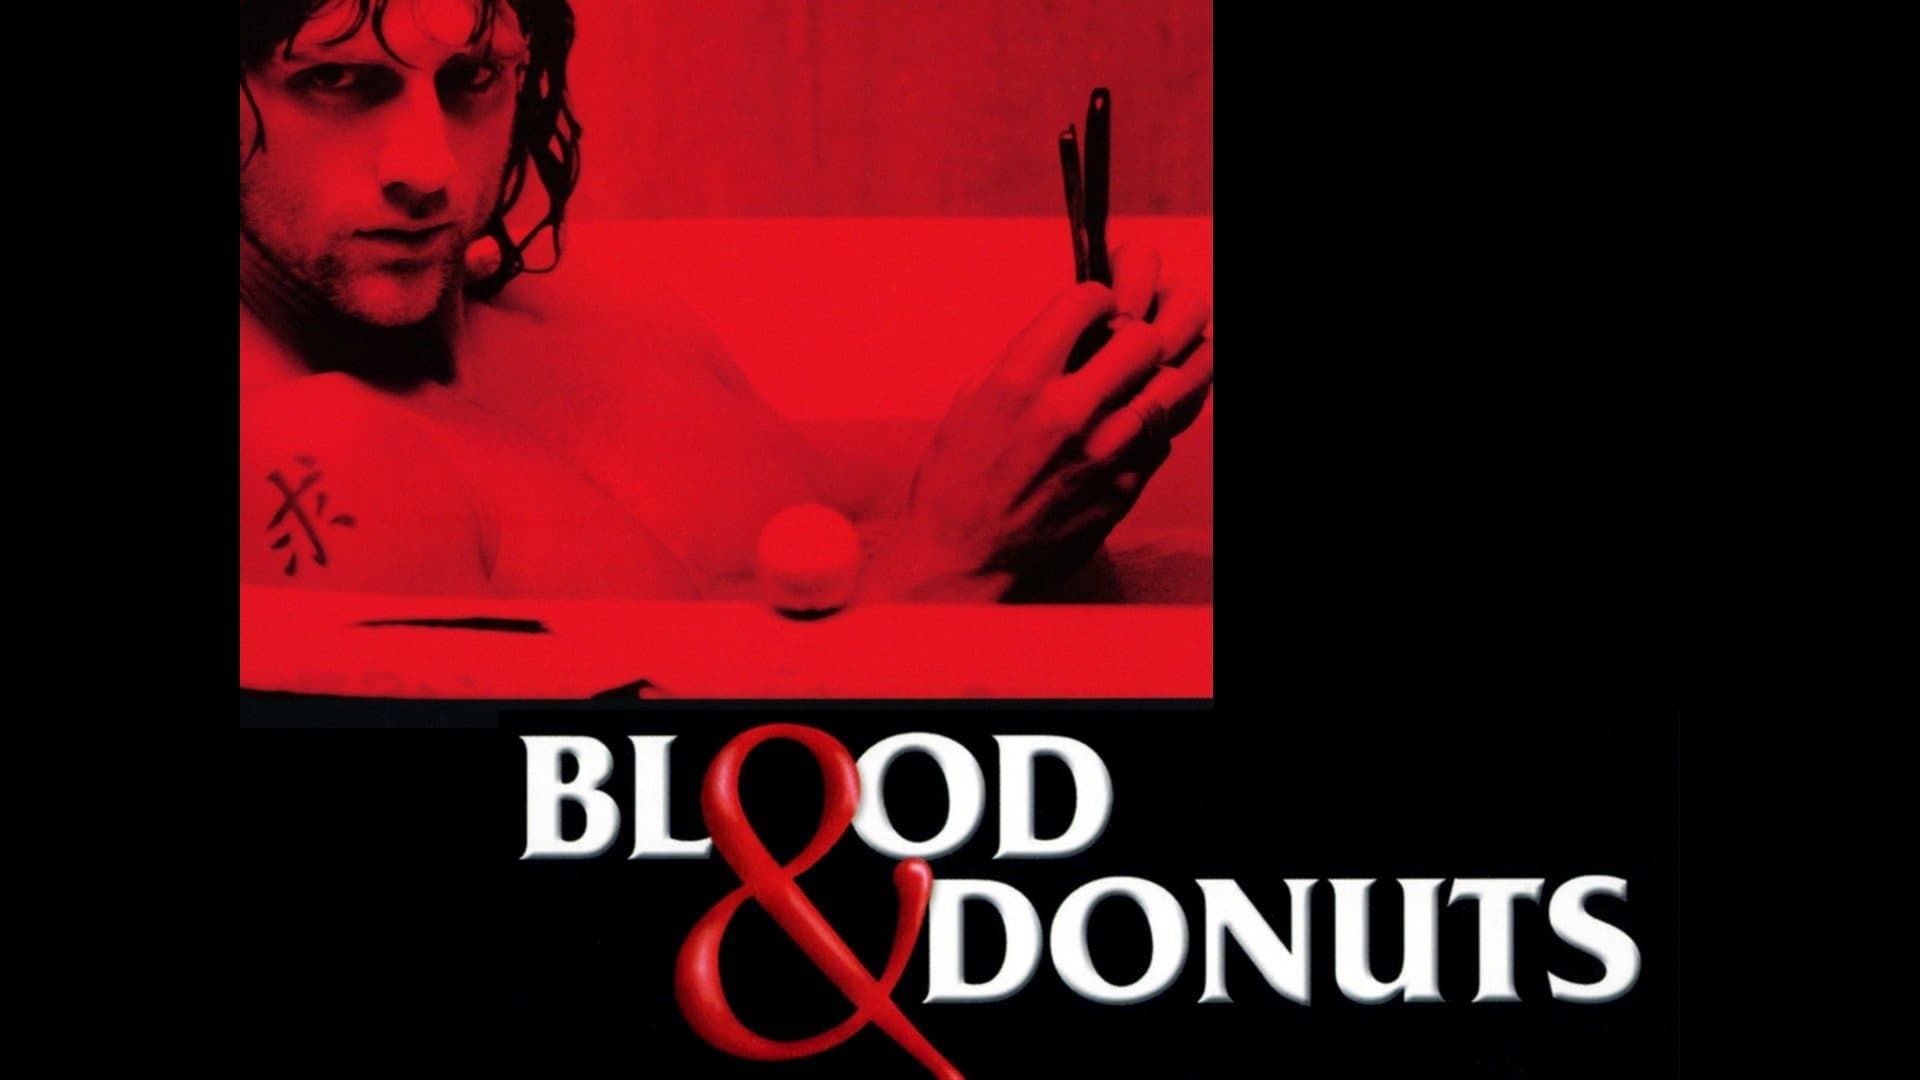 Blood & Donuts background